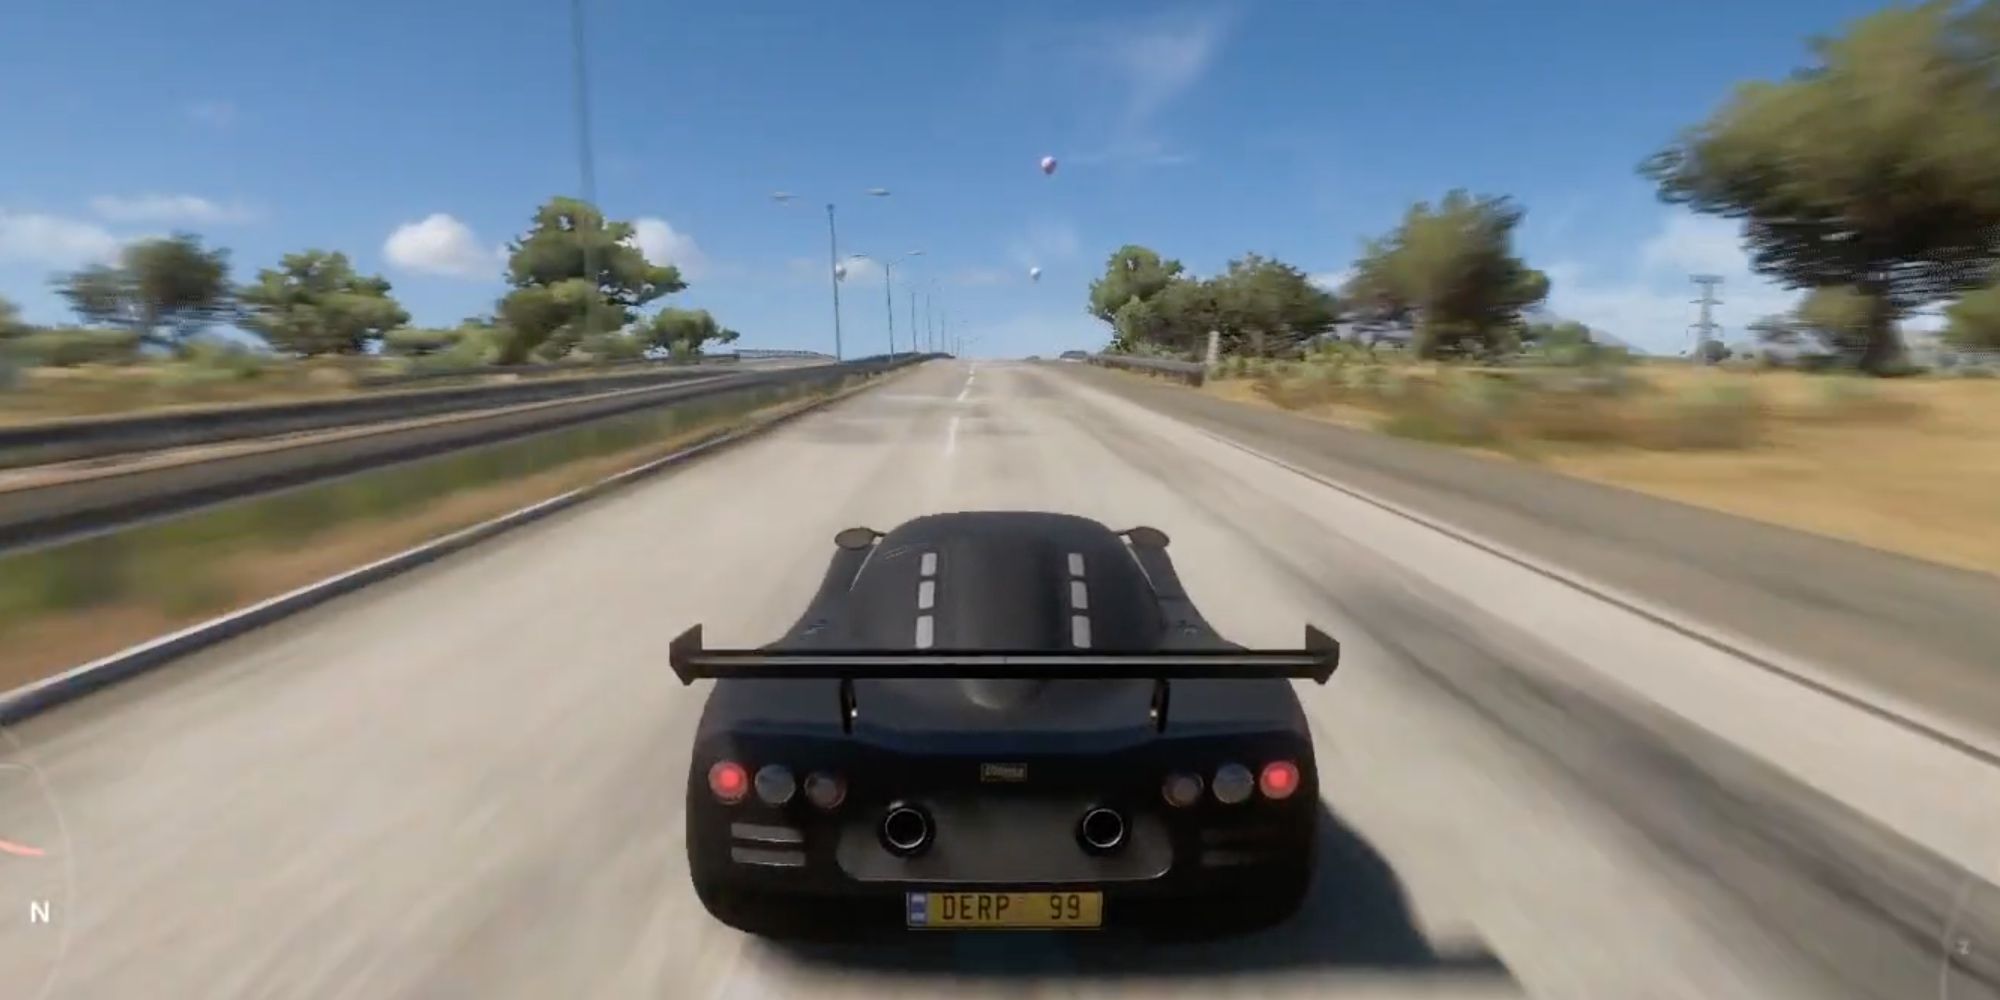 Player drives a convertible car in the daytime